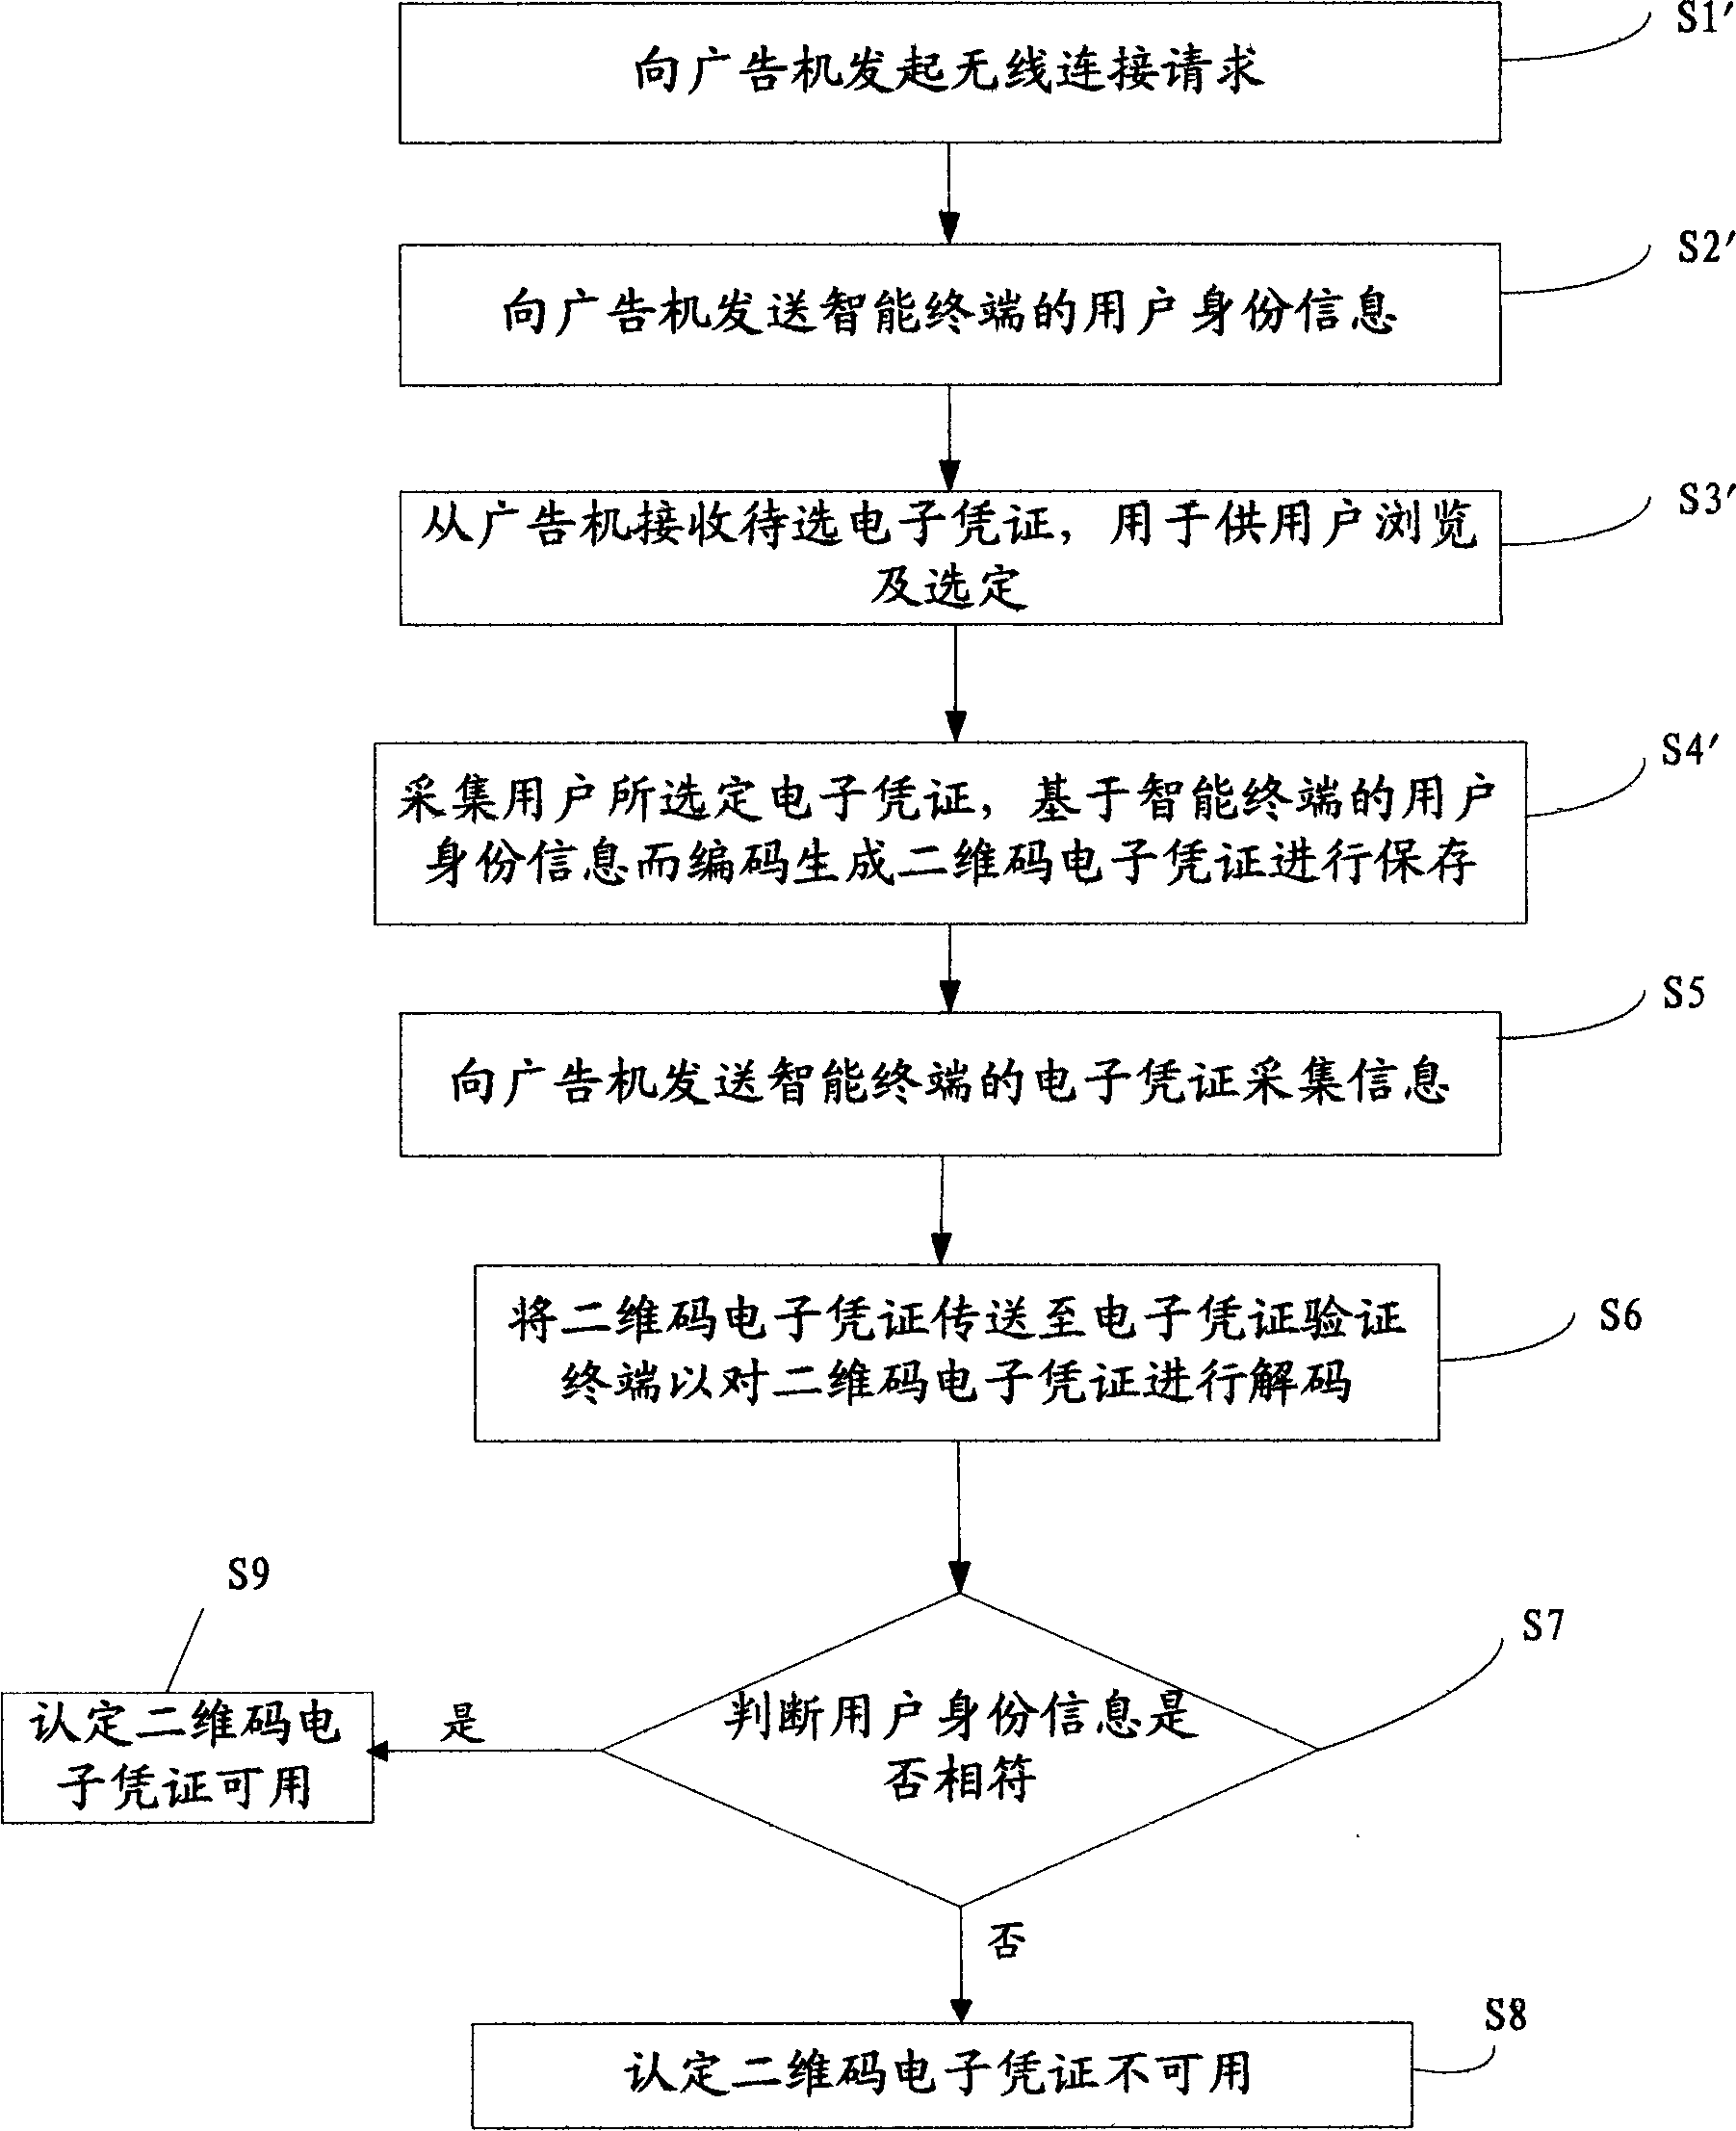 Electronic certificate acquiring and dispensing method, intelligent terminal and advisement player